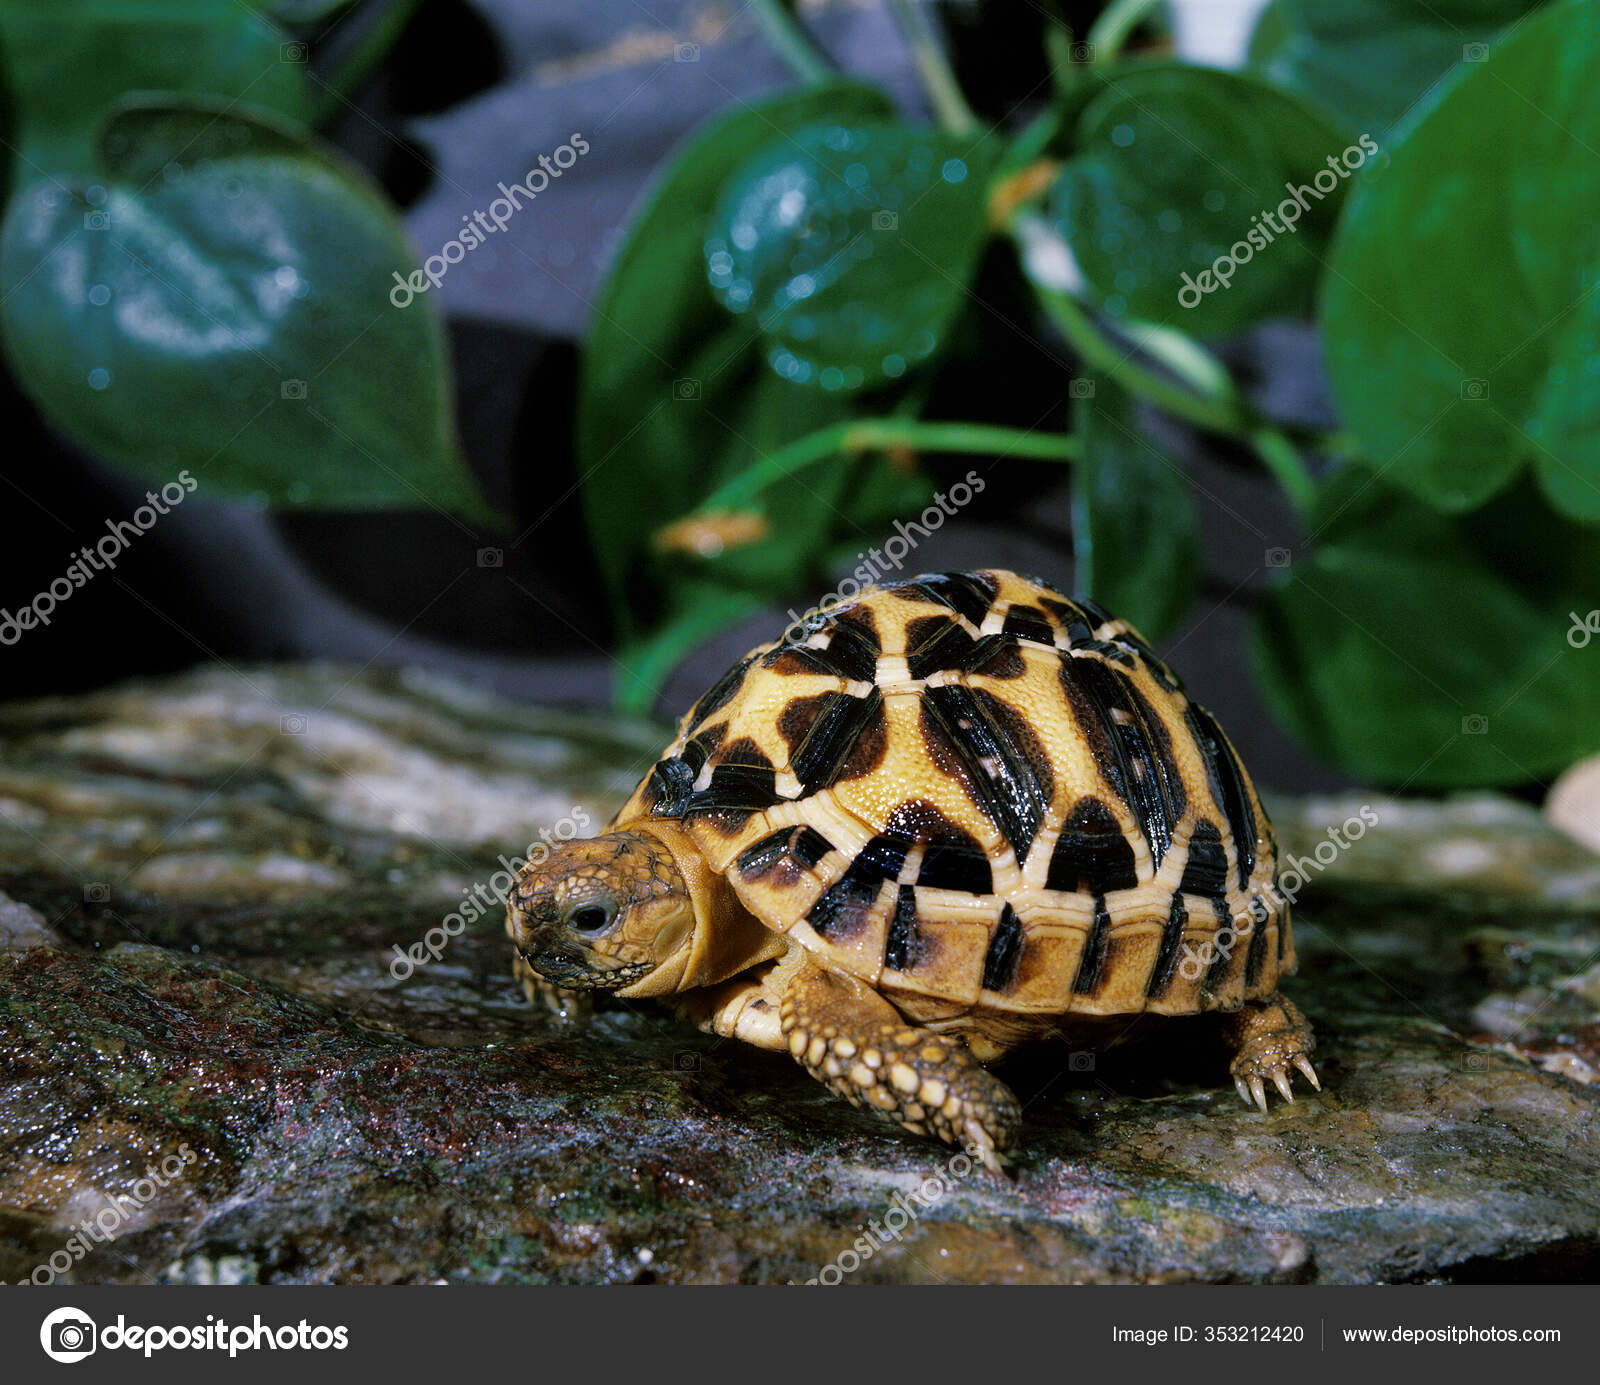 48 Indian Spotted Turtle Stock Photos Free Royalty Free Indian Spotted Turtle Images Depositphotos